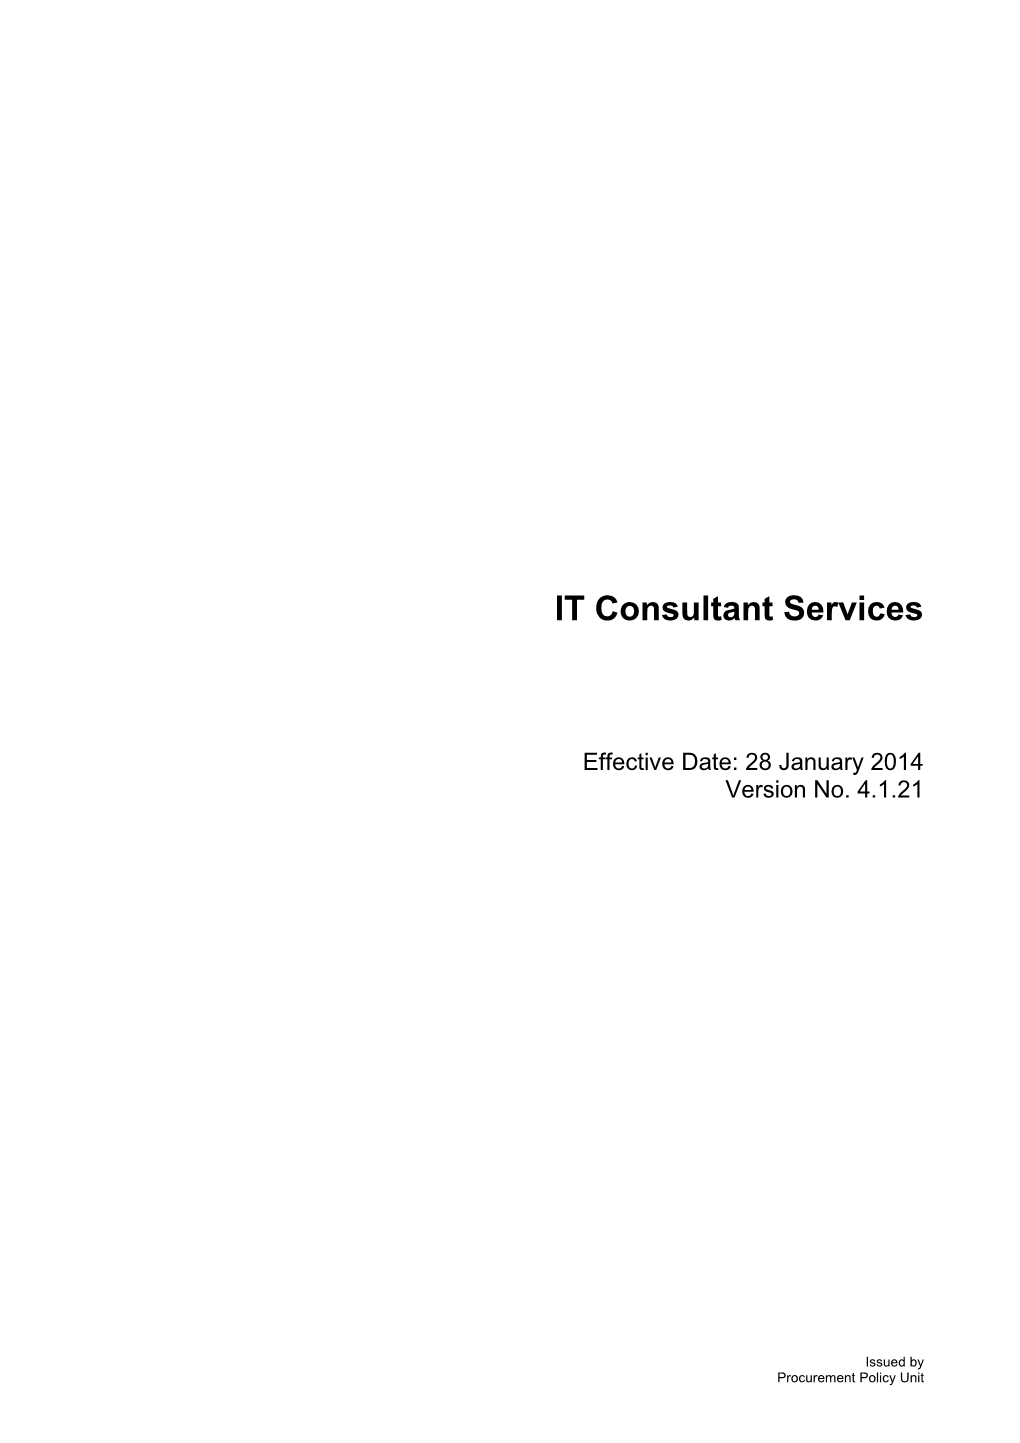 IT Consultant Services - V 4.1.21 (28 January 2014)